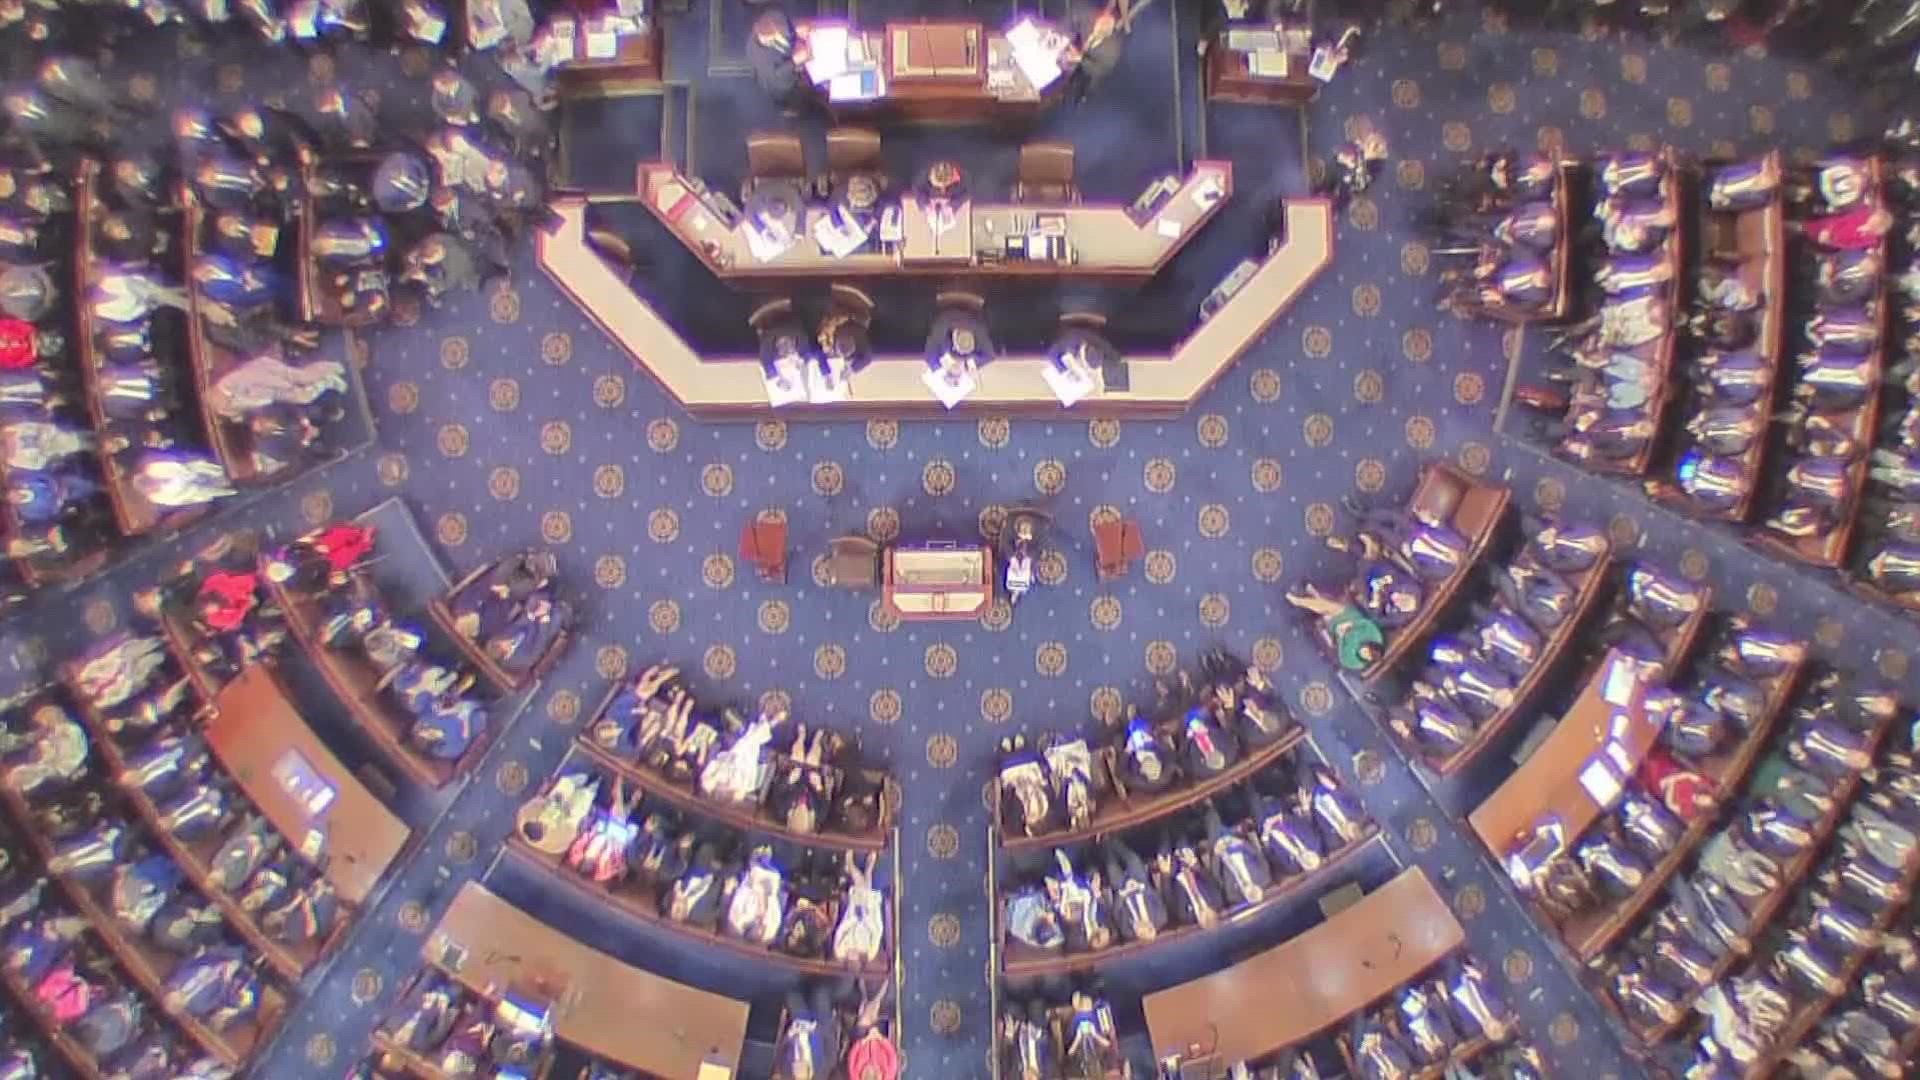 Without a speaker, the House cannot fully form to swear in its members, name committee chairmen or engage in floor proceedings.